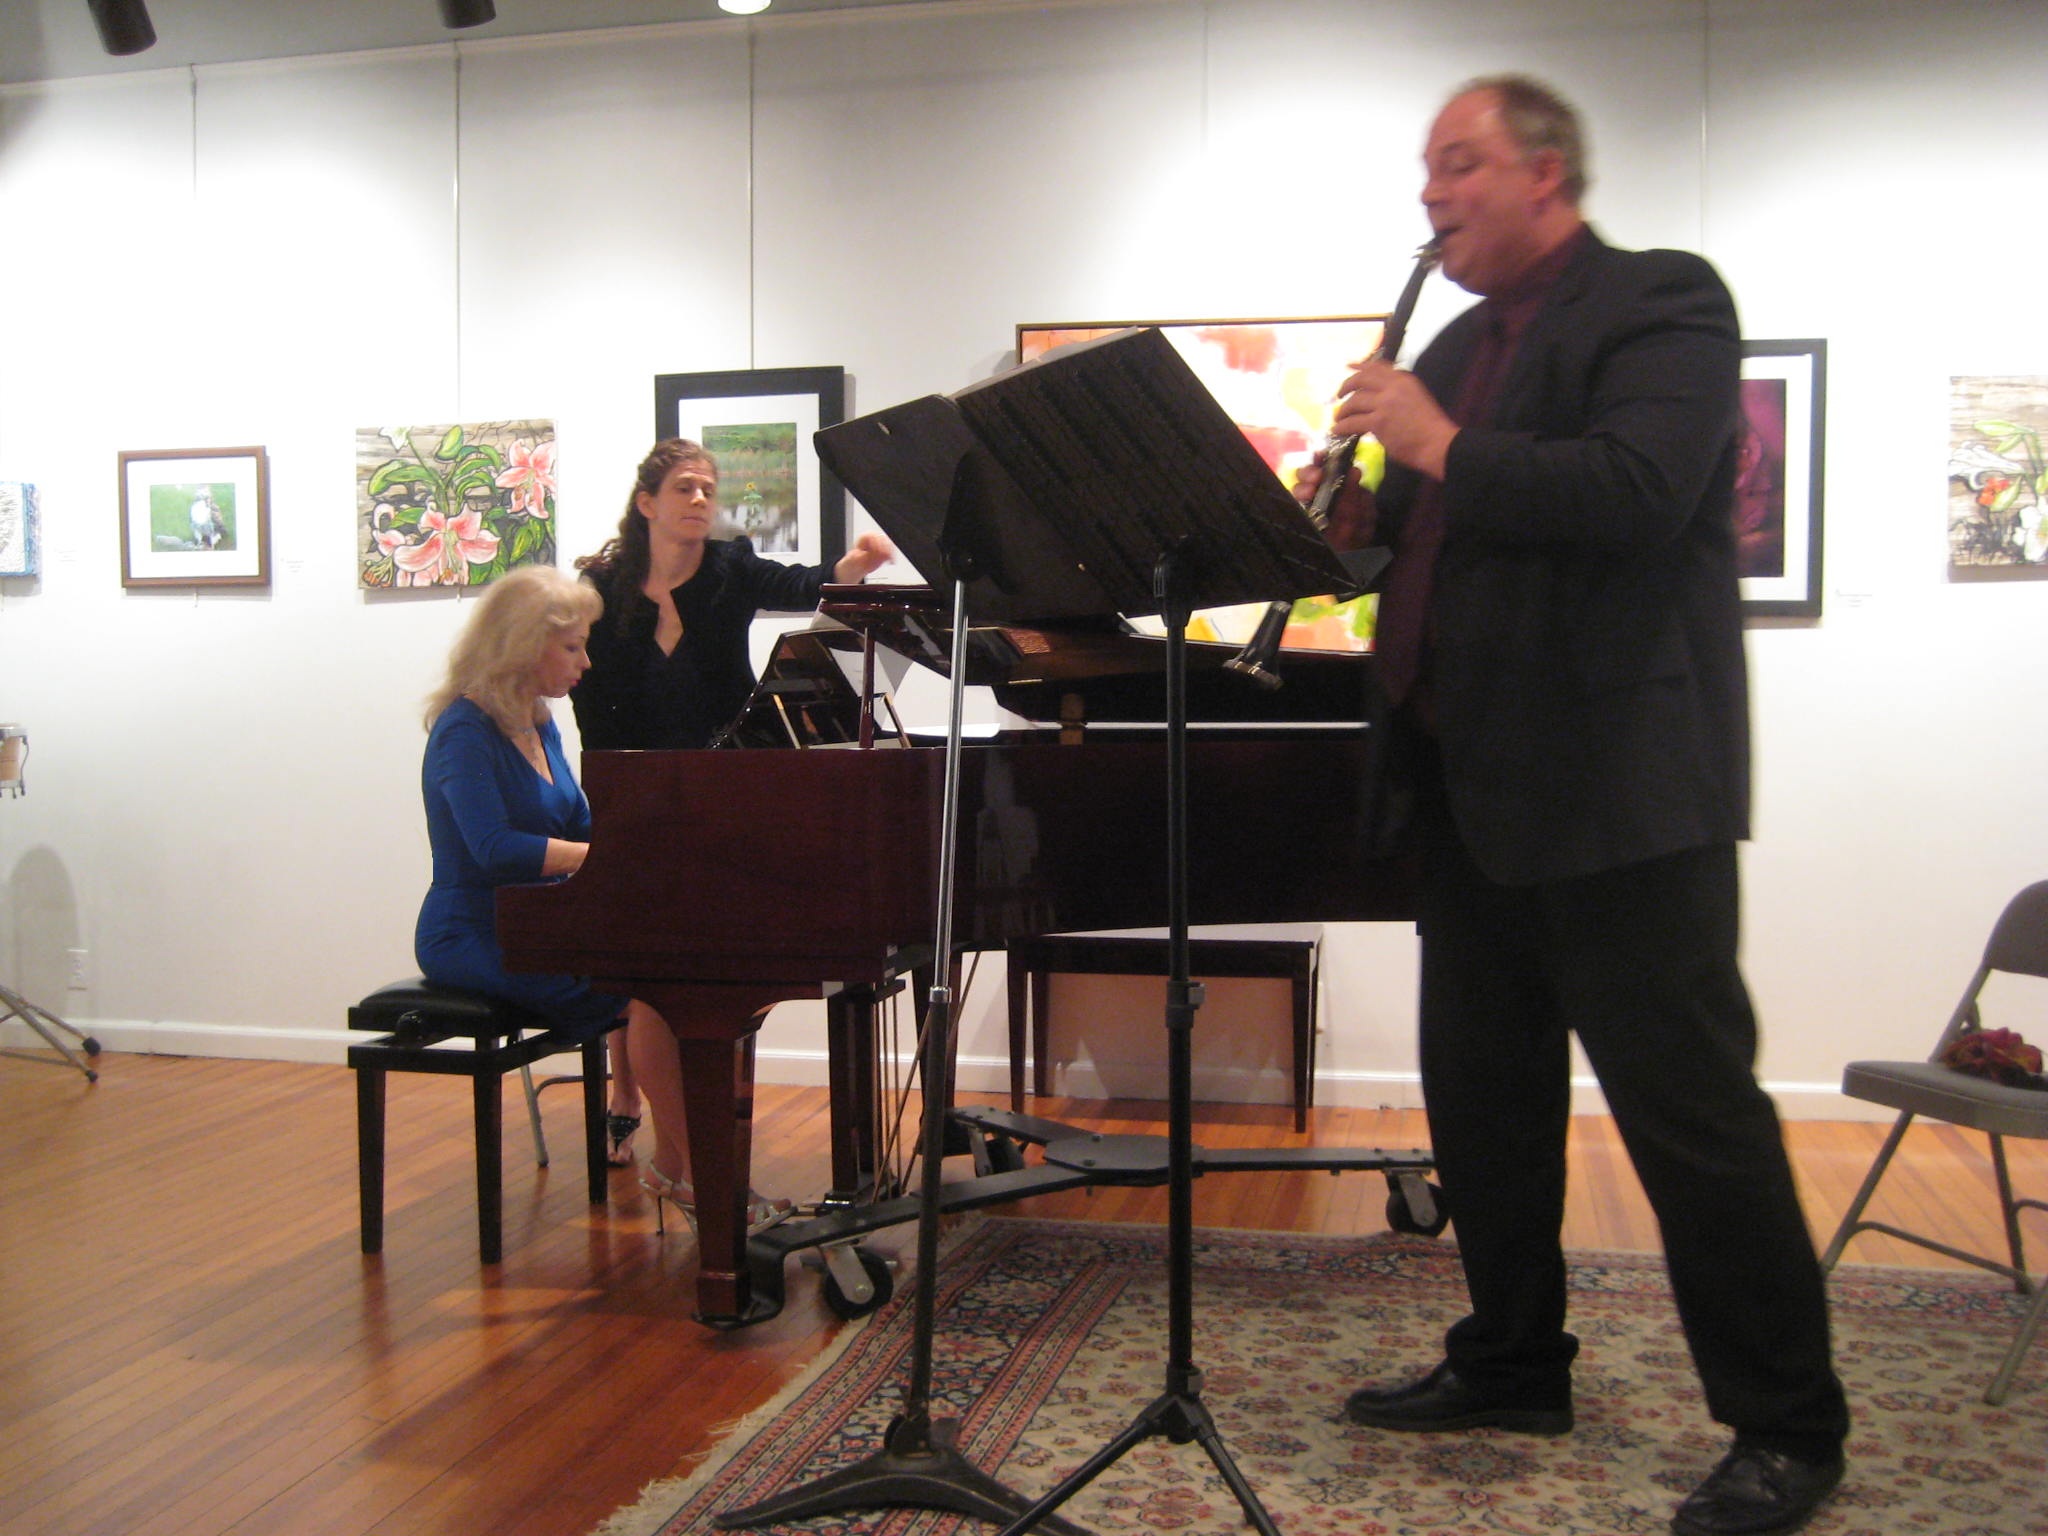 With Andrew Lamy at the Watchung Arts Center Concert, May 5, 2012